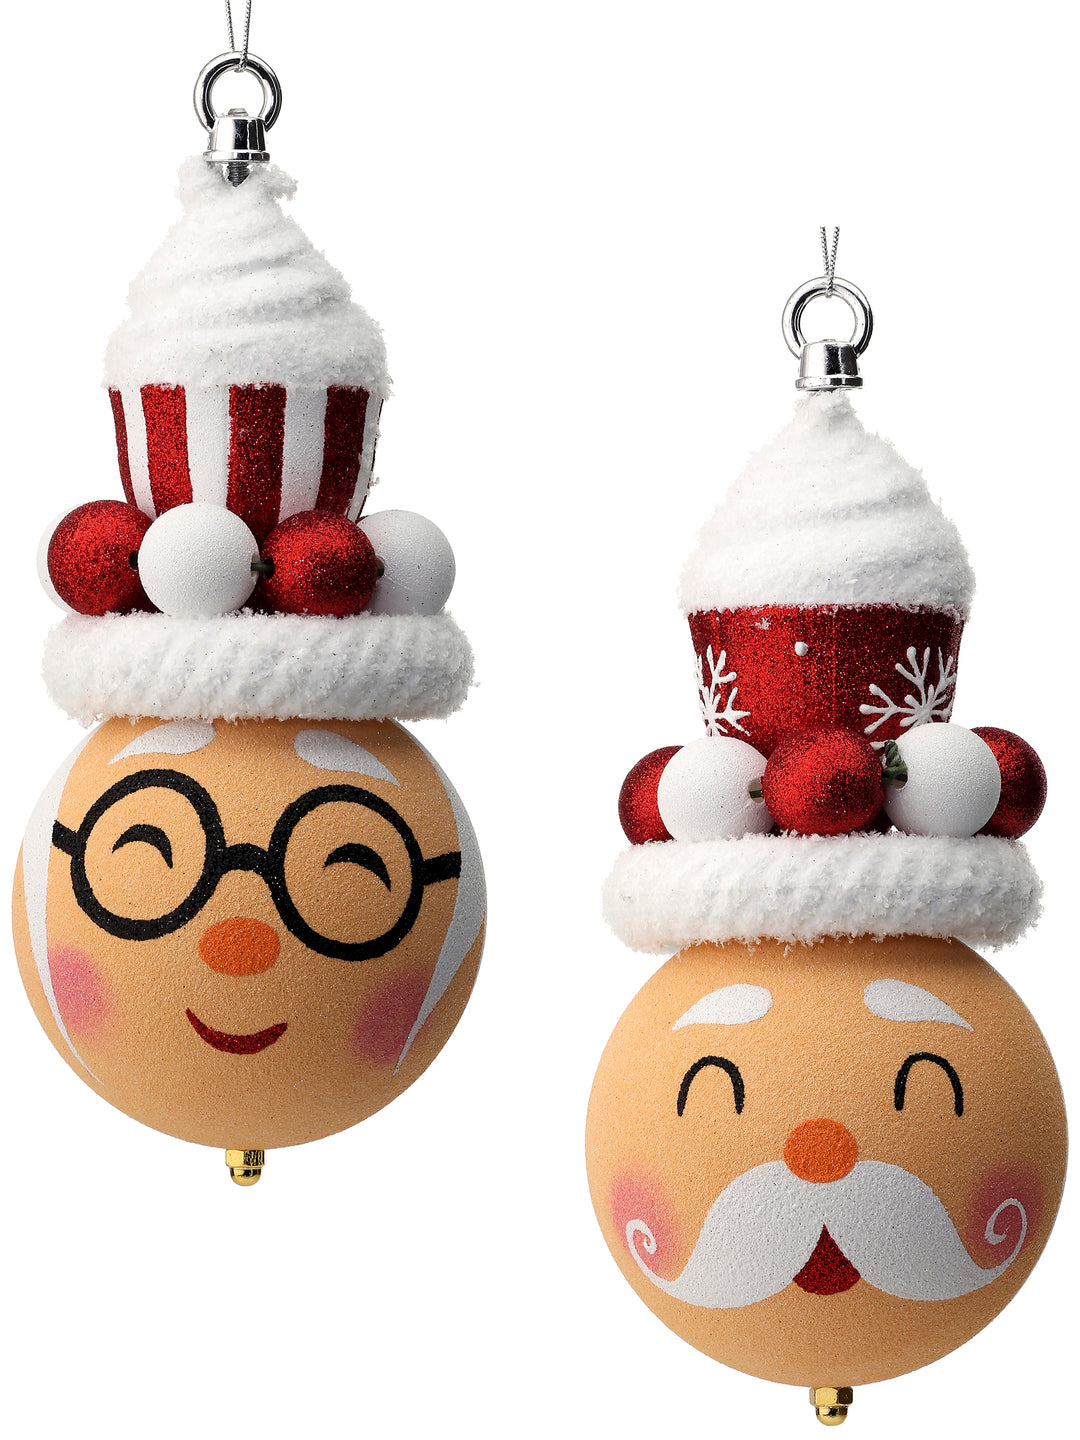 Regency 10" Mr. & Mrs. Claus w/ Cupcake Candy Hat ornaments/attachments - choice of 1